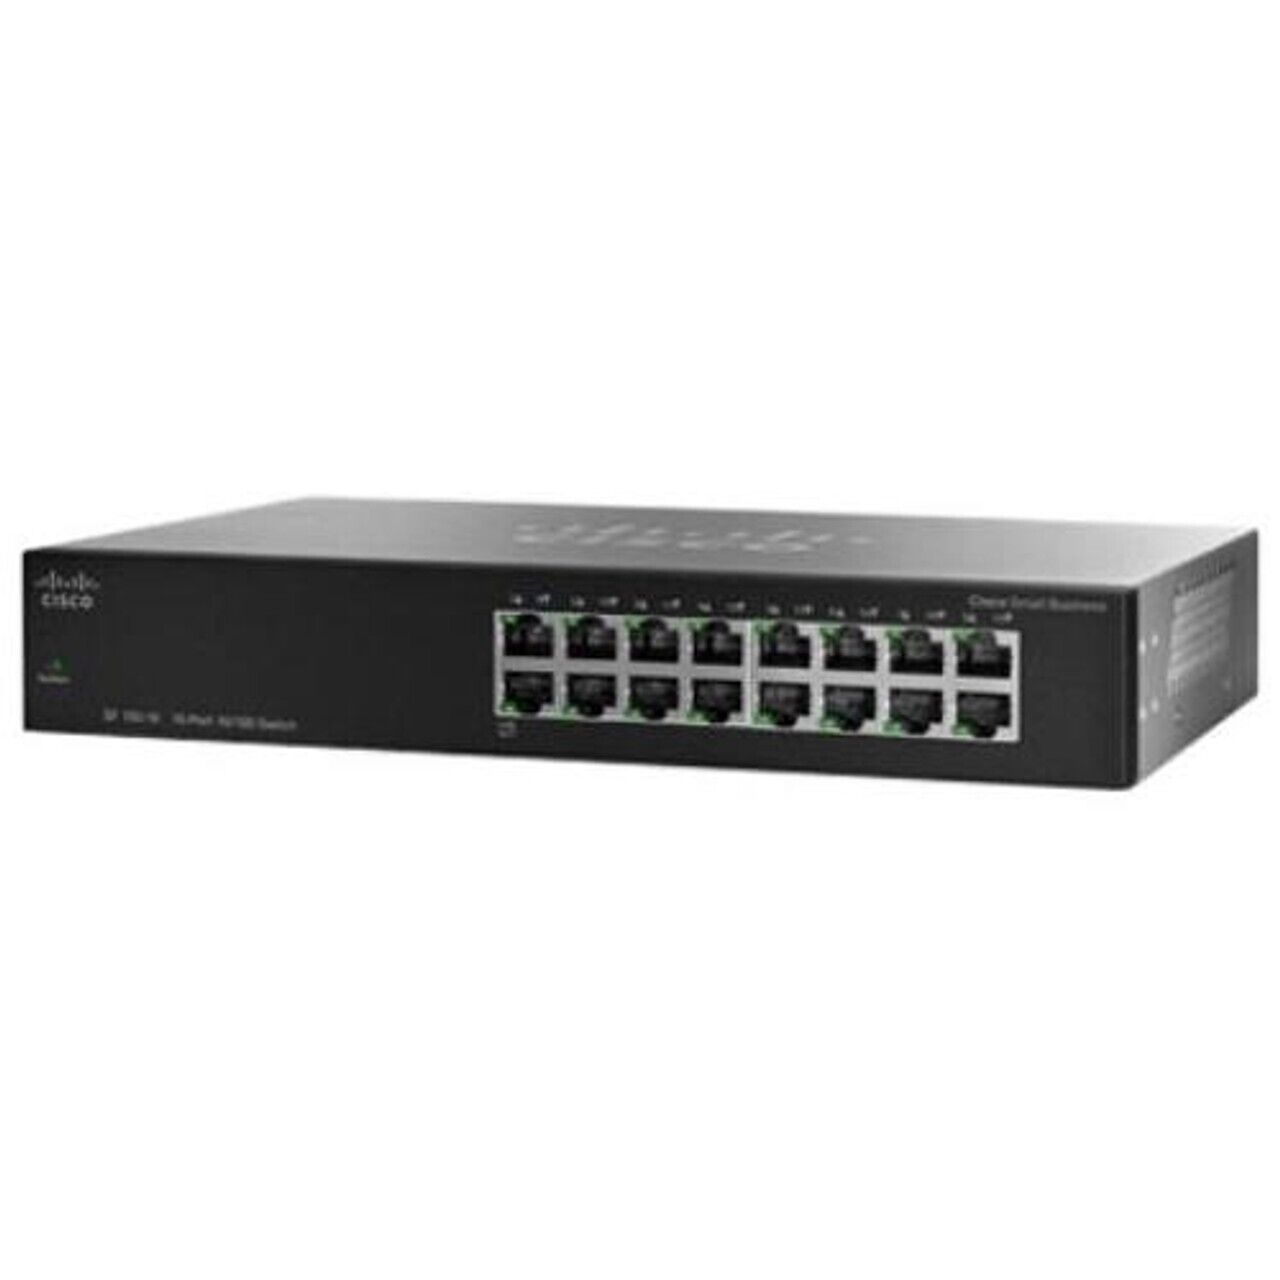 SF100-16 Cisco 16-Port 10/100 Unmanaged Rack Mountable Switch